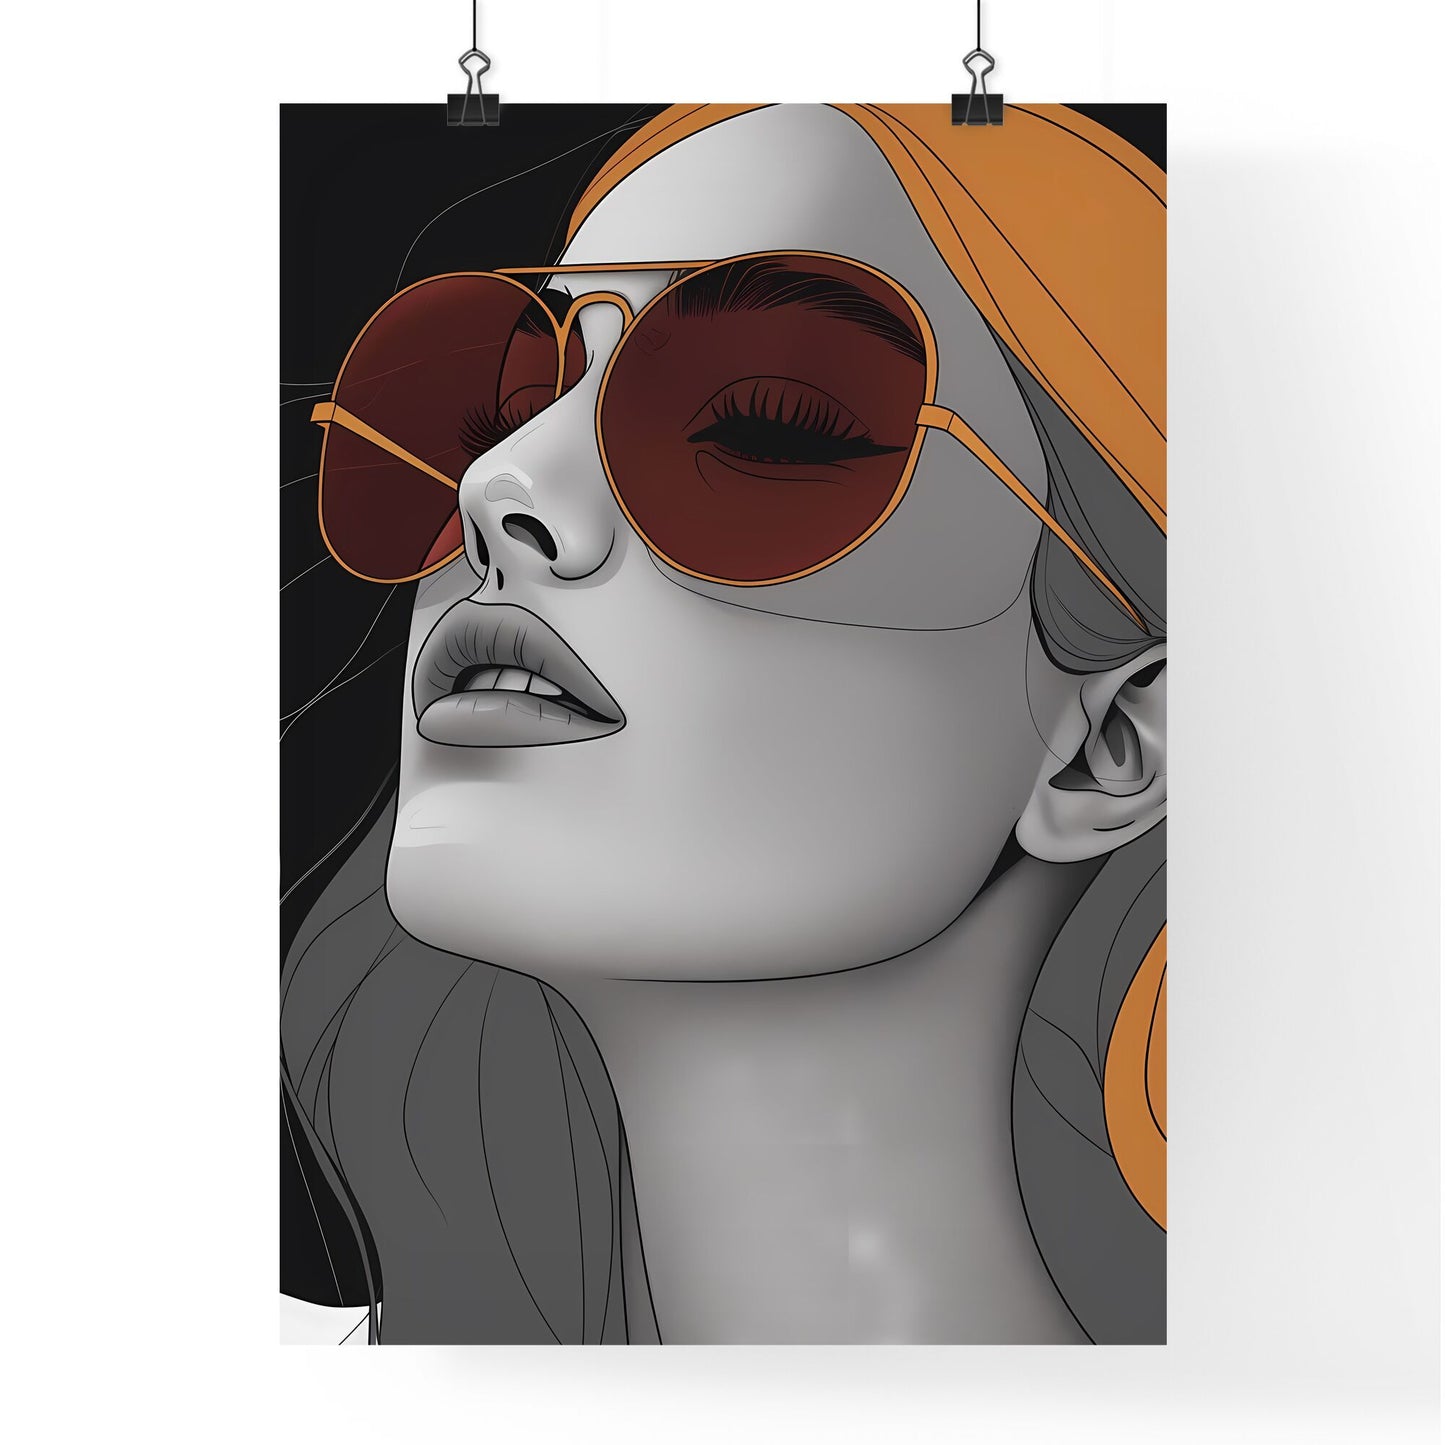 Abstract Line Art Poster: 60s Girl with Sunglasses, Minimalist Geometric Shapes Default Title